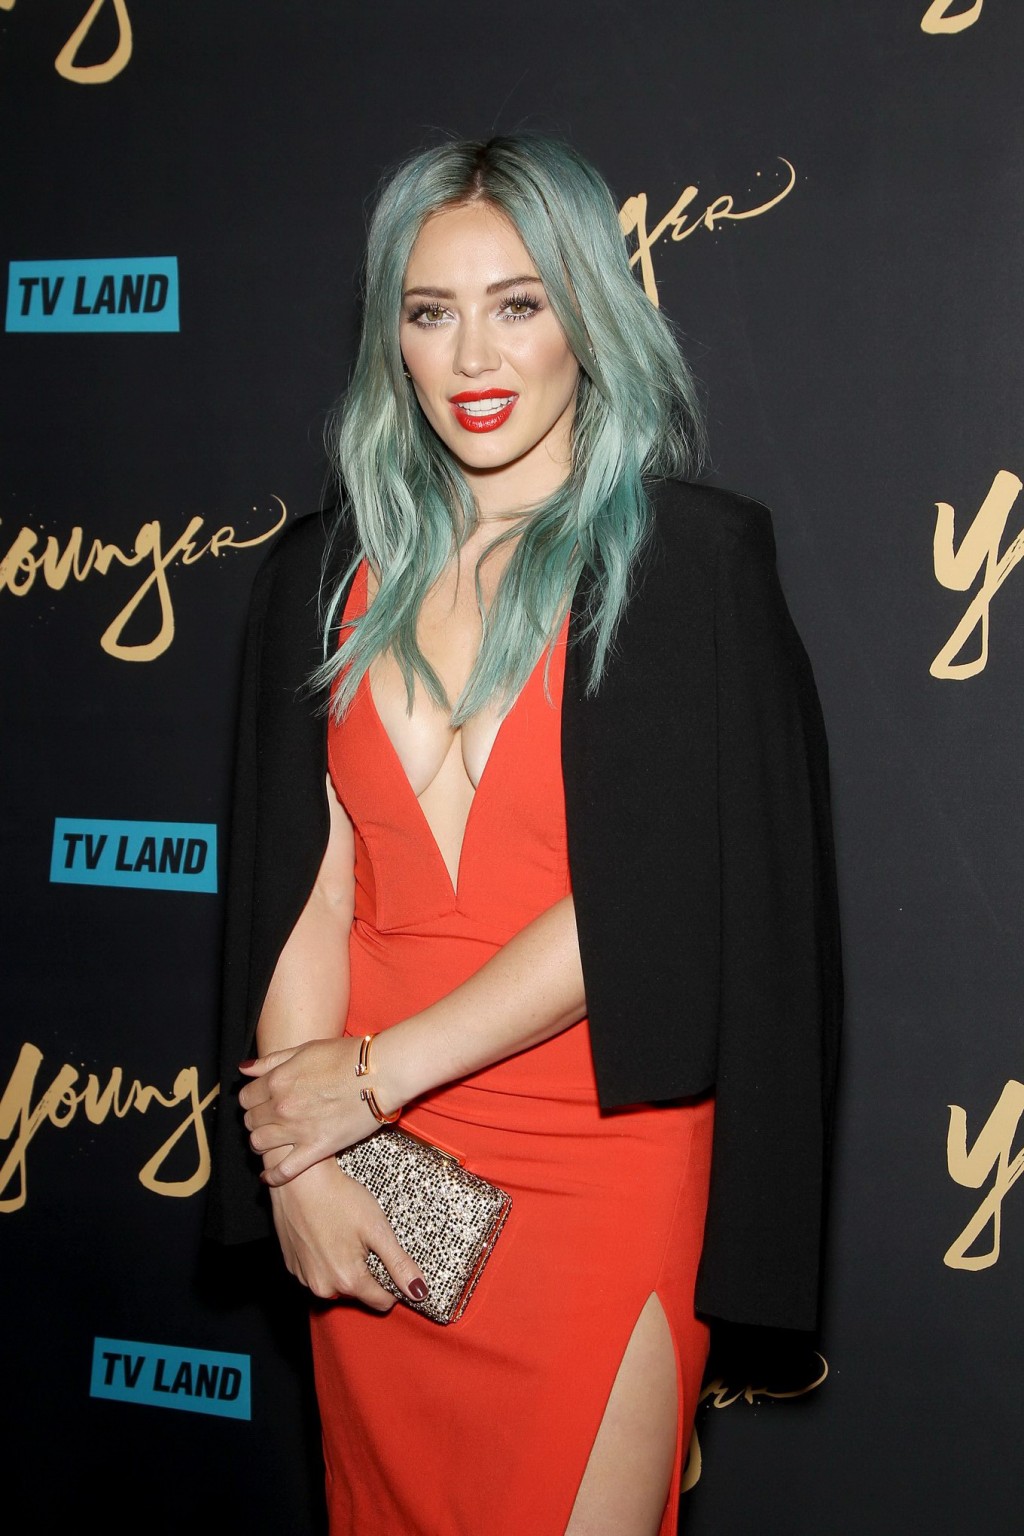 Hilary Duff showing huge cleavage braless in short red dress at the Younger prem #75168348